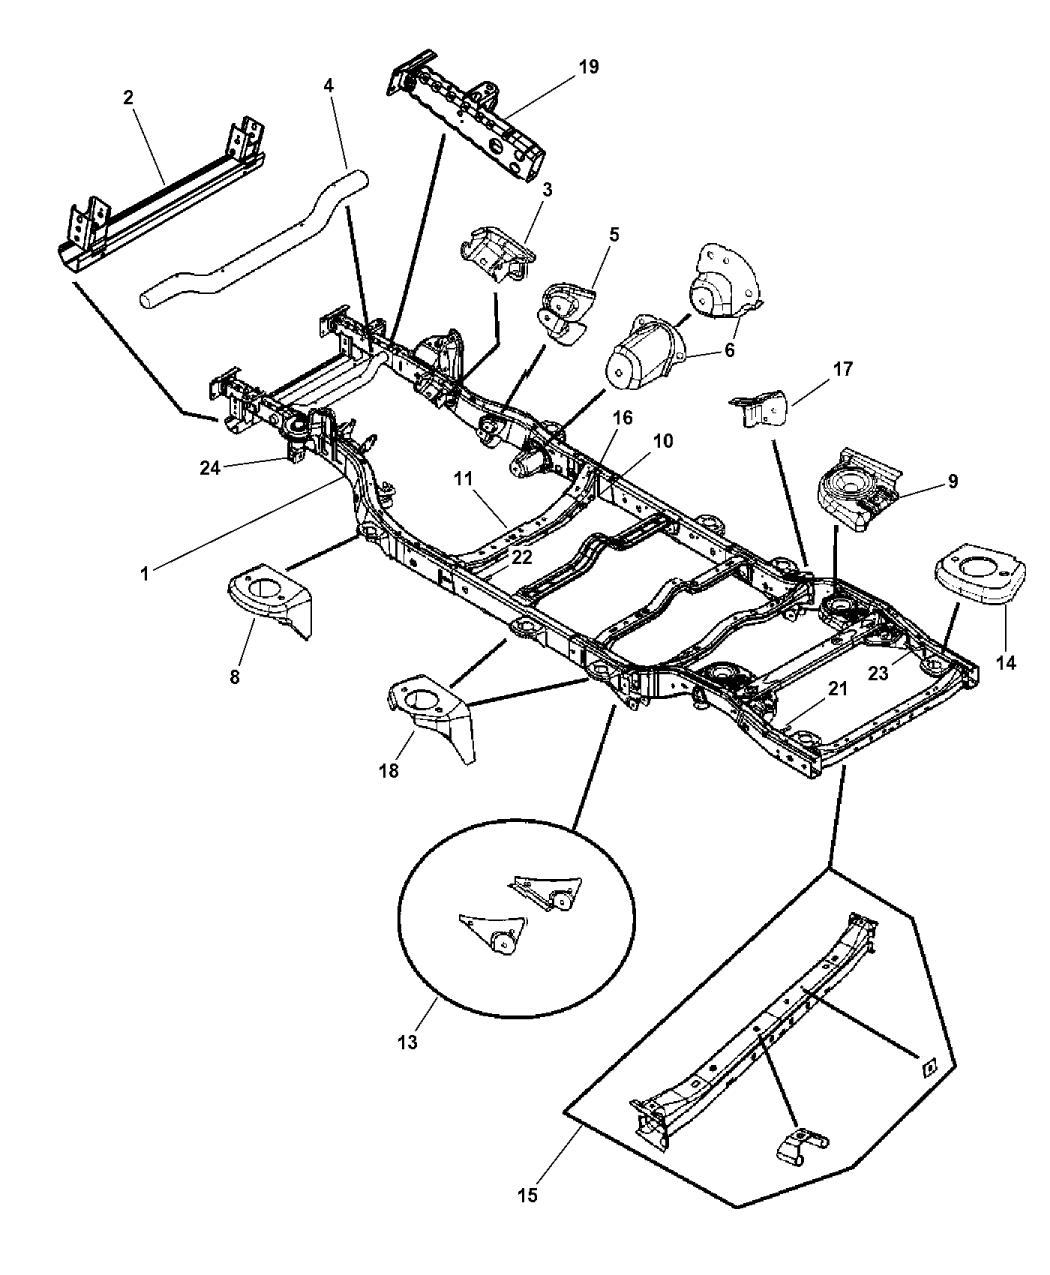 1995 jeep wrangler frame and parts diagram